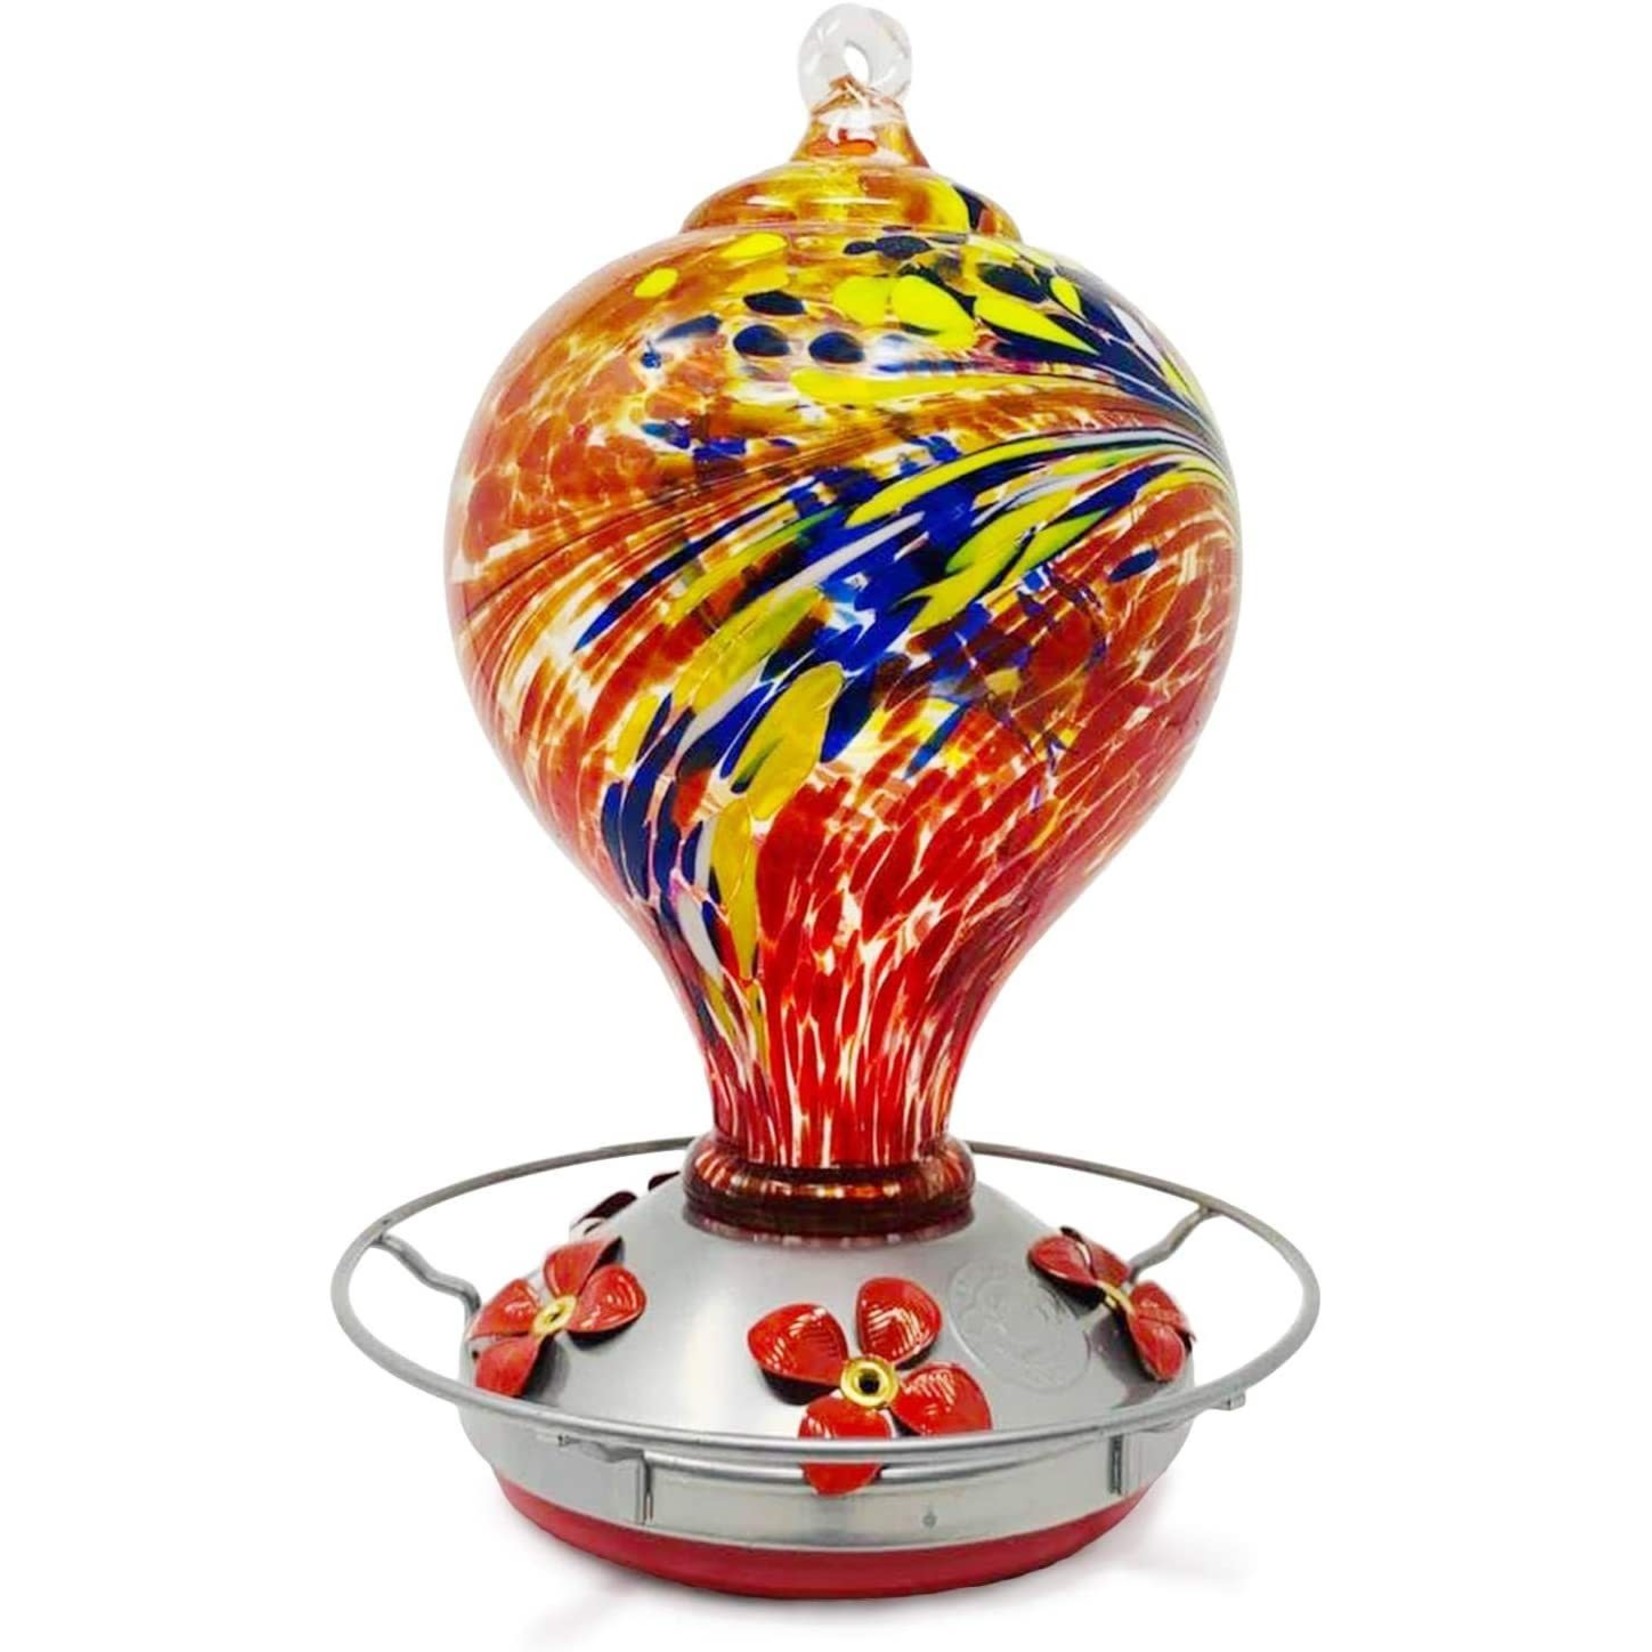 Large Red Egg with Flowers Hummingbird Feeder